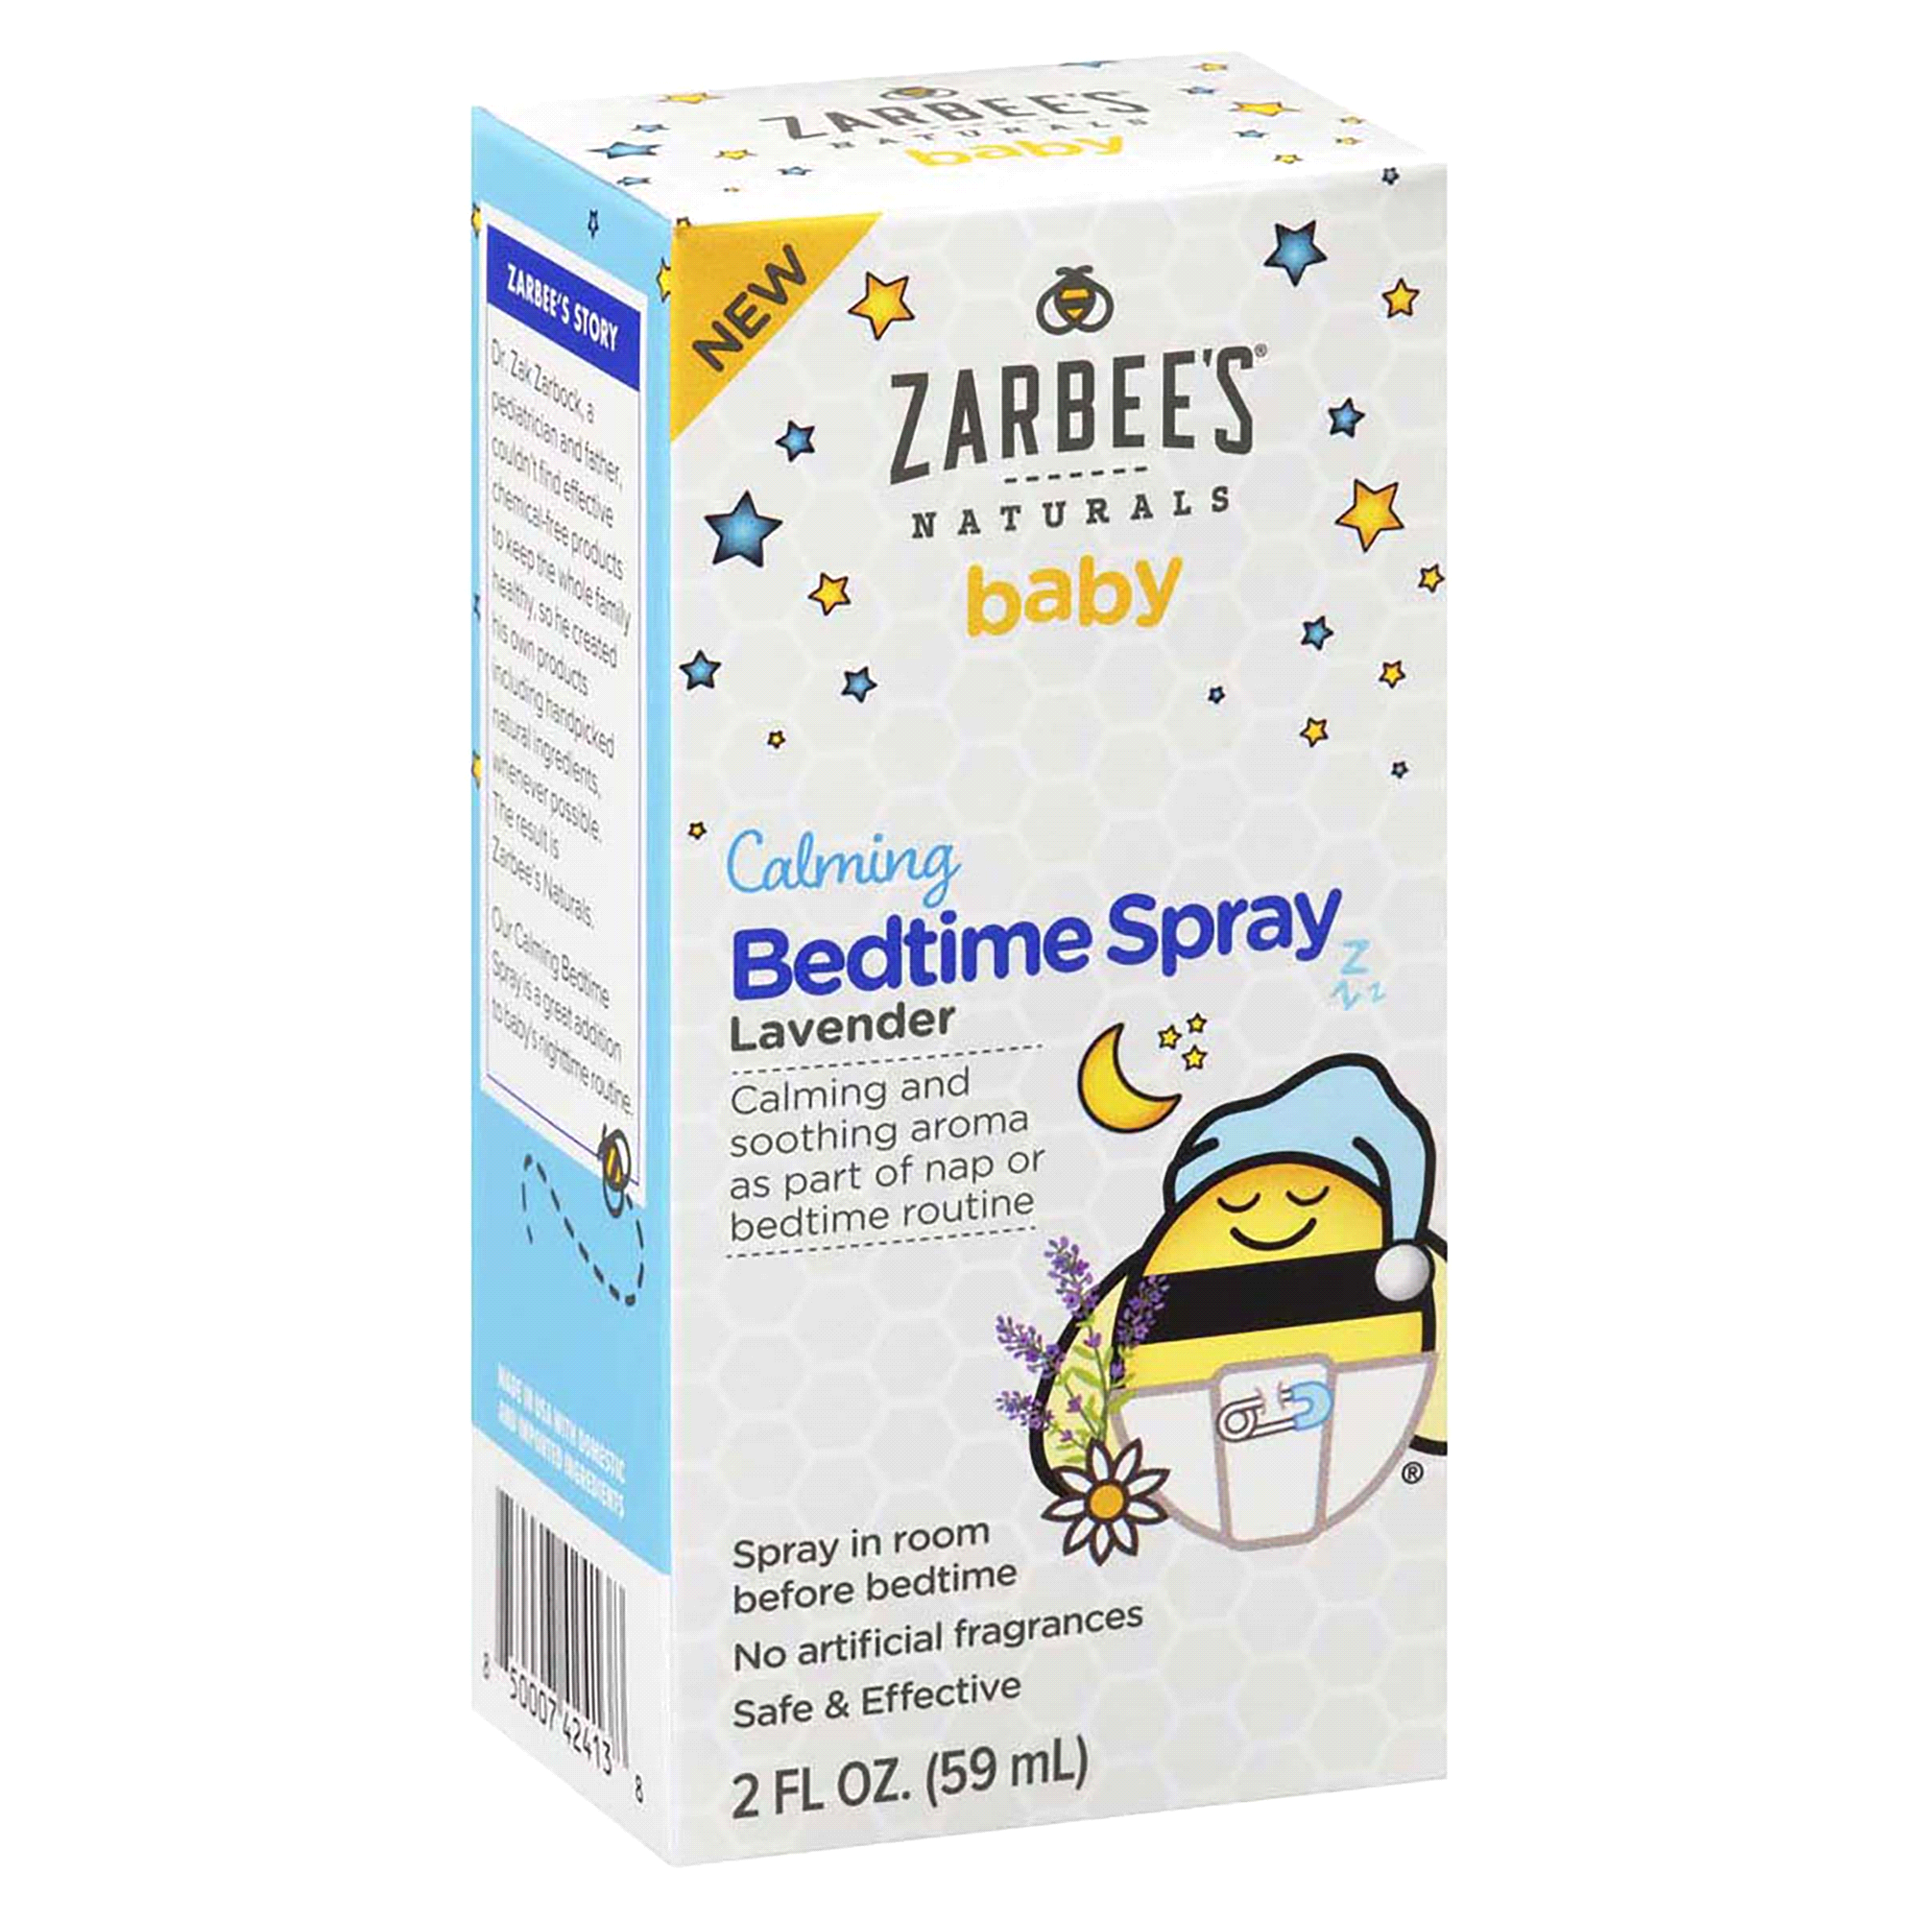 slide 4 of 13, Zarbee's Naturals Baby Sleep Spray, Calming Bedtime Spray with Natural Lavender and Chamomile to Help Infant
Nighttime Routine, 2oz Bottle, 2 fl oz